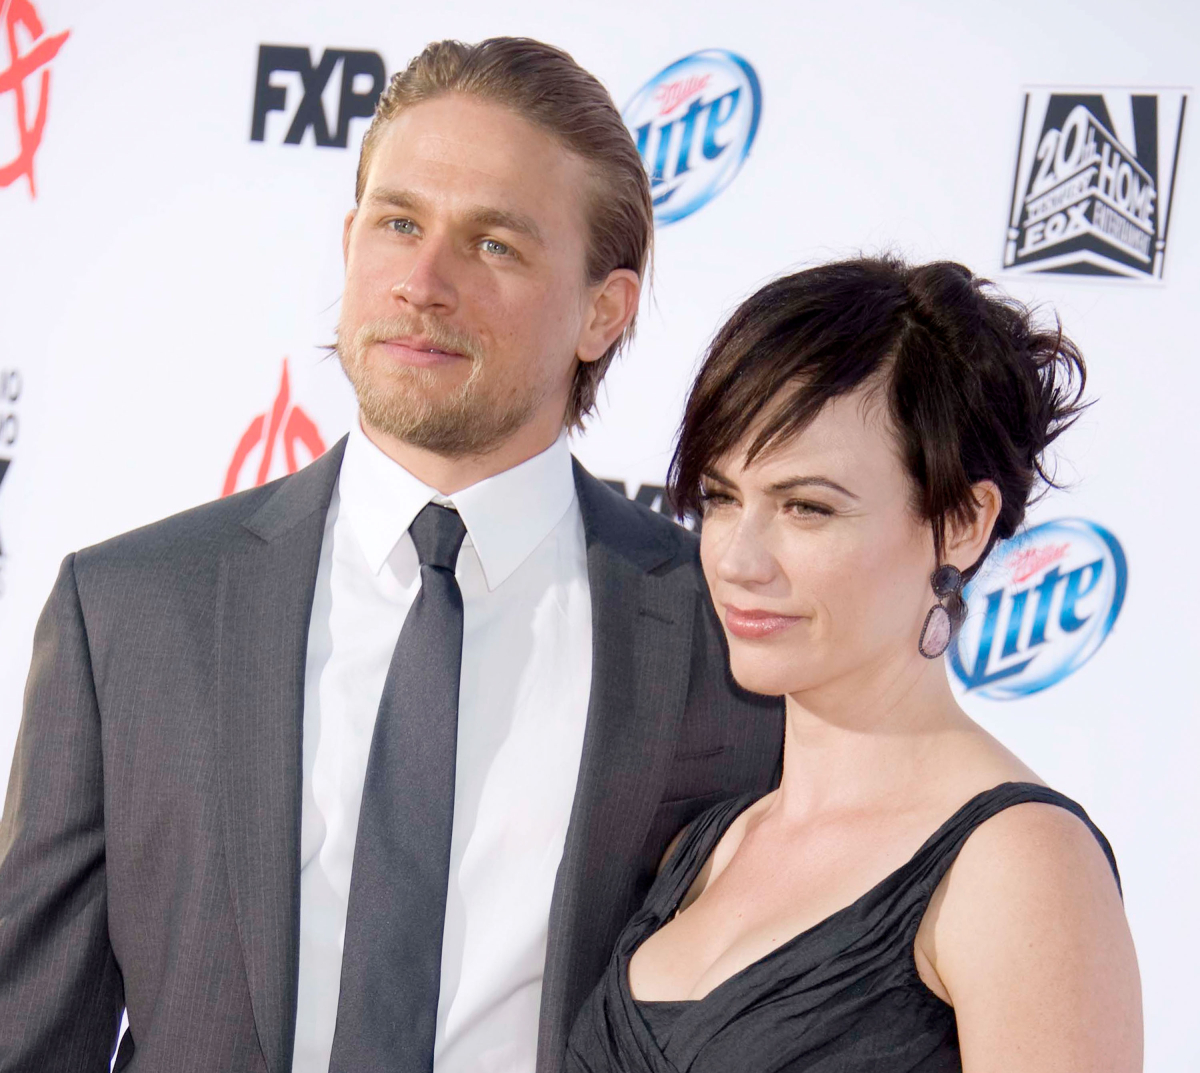 Charlie Hunnam and Maggie Siff arrive at FX's "Sons Of Anarchy" Season 6 premiere screening at Dolby Theatre on September 7, 2013